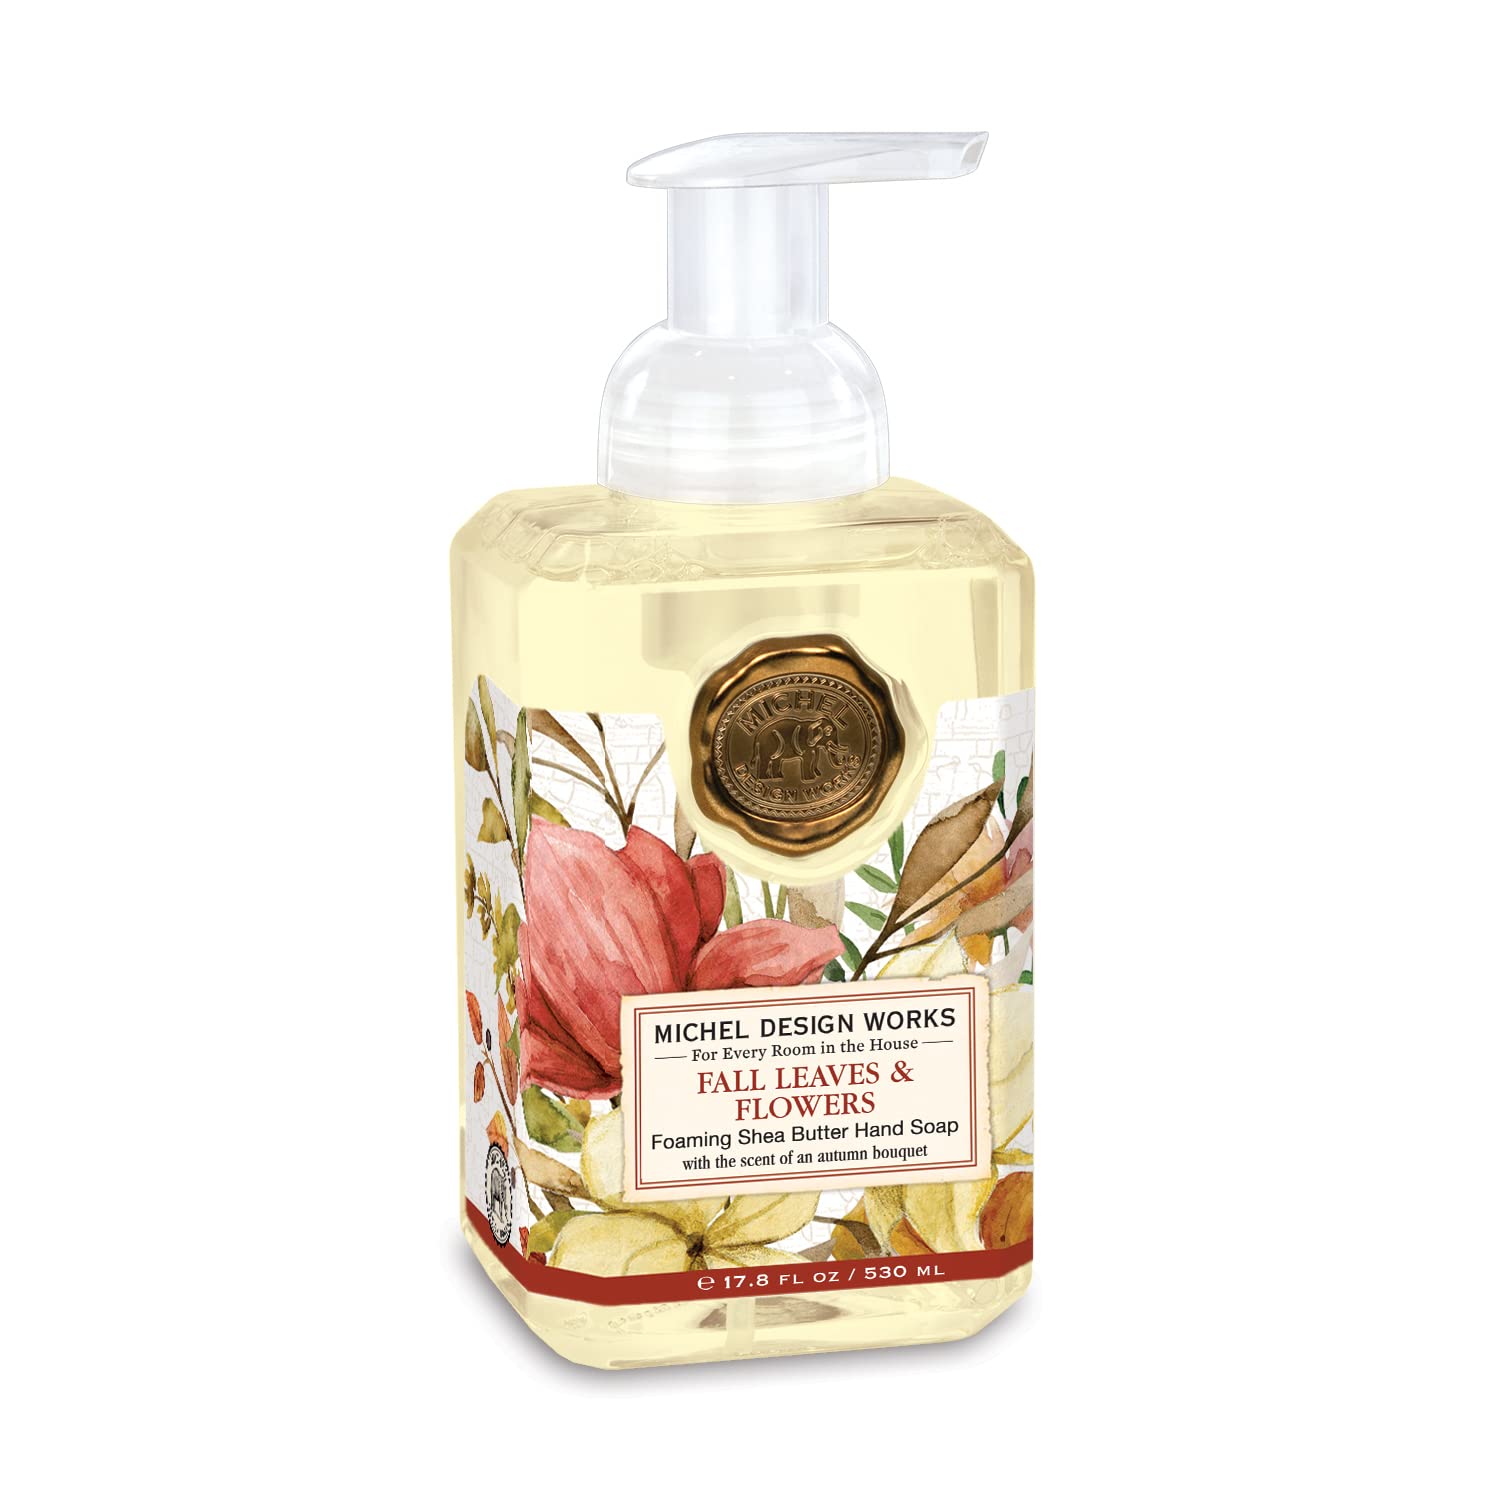 Michel Design Works Foaming Hand Soap, Fall Leaves & owers